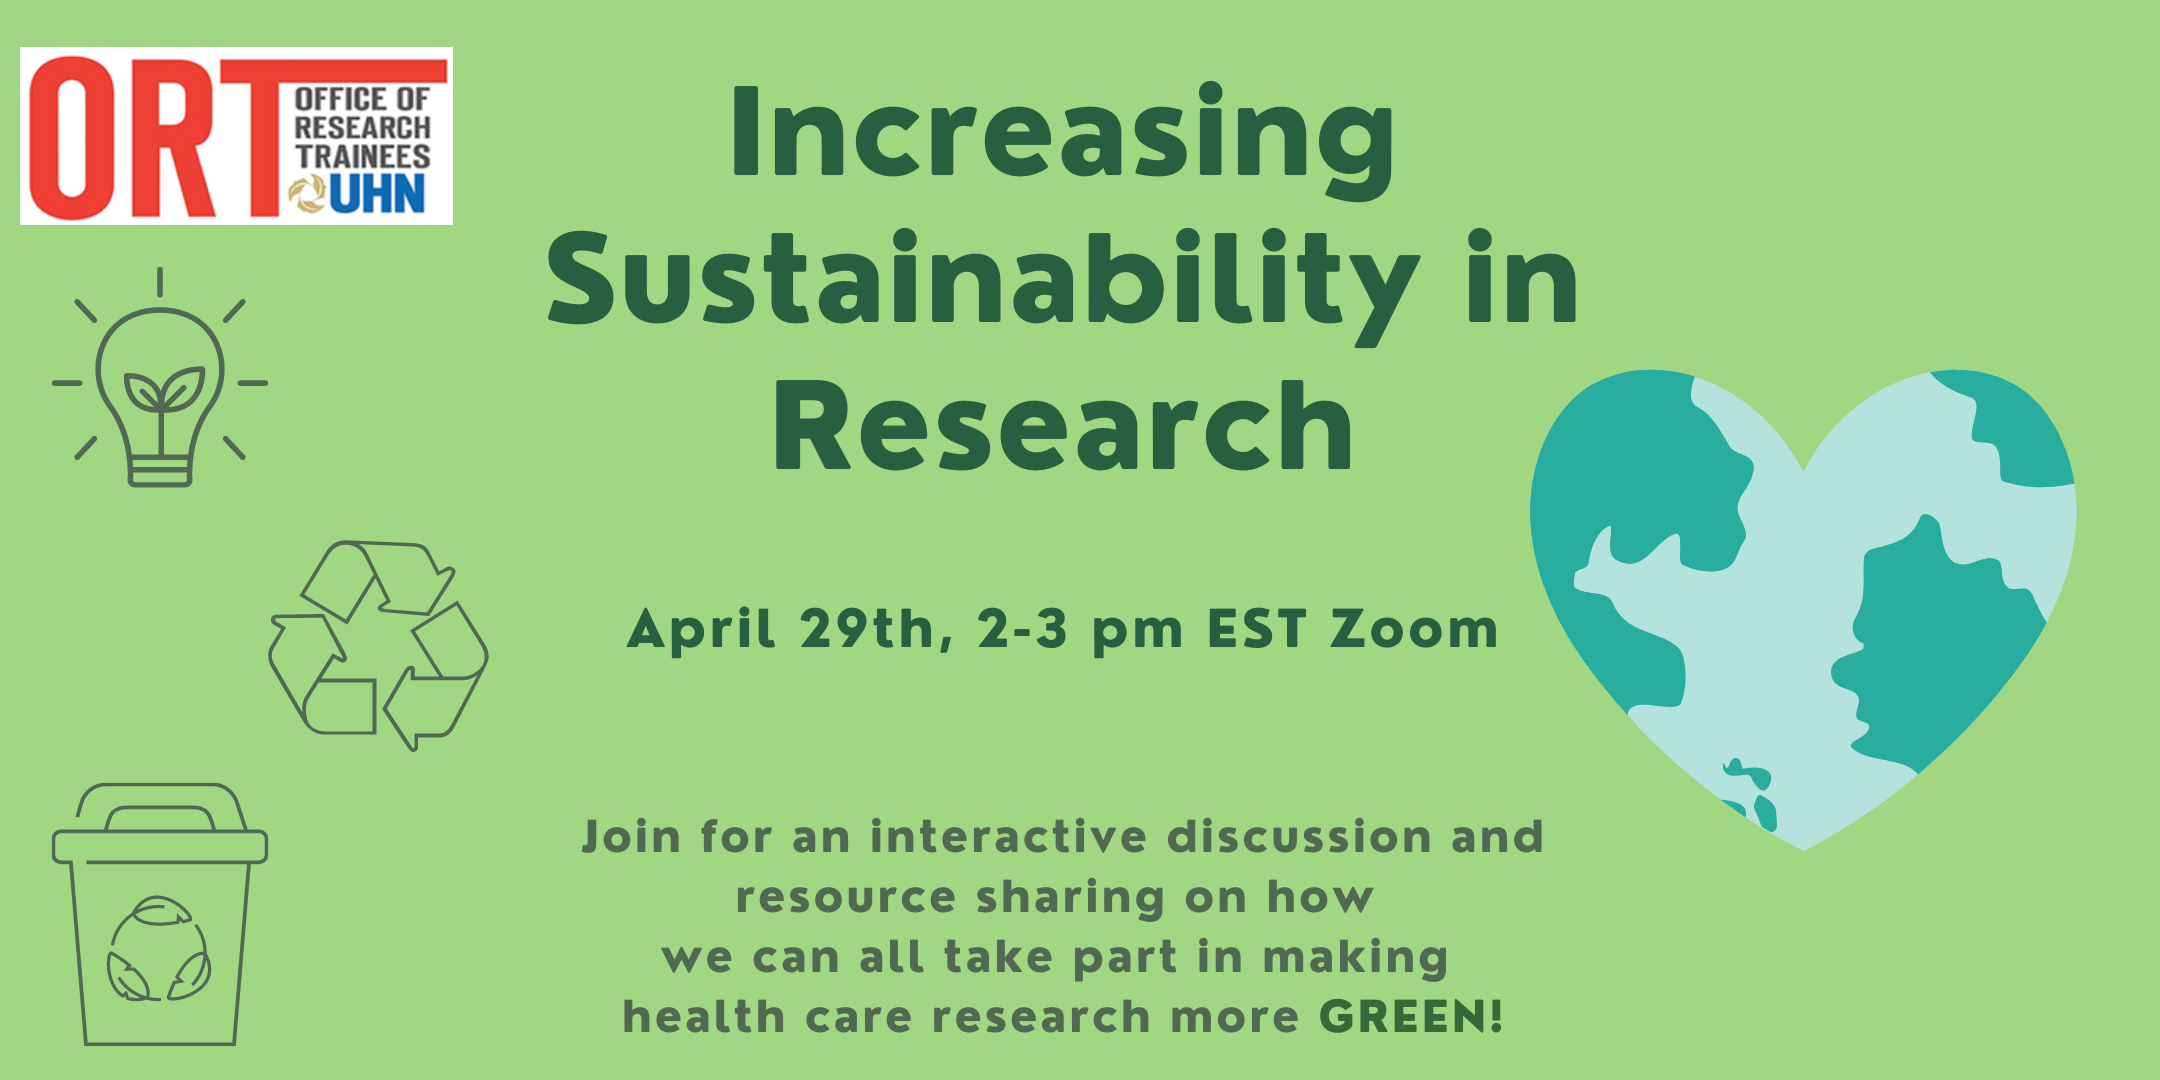 Green poster with ORT logo on the top left corner. Text in dark green reads: Increasing Sustainability in Research, April 29th, 2-3 pm, EST, Zoom. Join for an interactive discussion and resource sharing on how we can all take part in making health care research more green. On the right is a clipart image of the world in the shape of a heart. On the left is a picture of a light bulb, recycling image, and waste bucket.